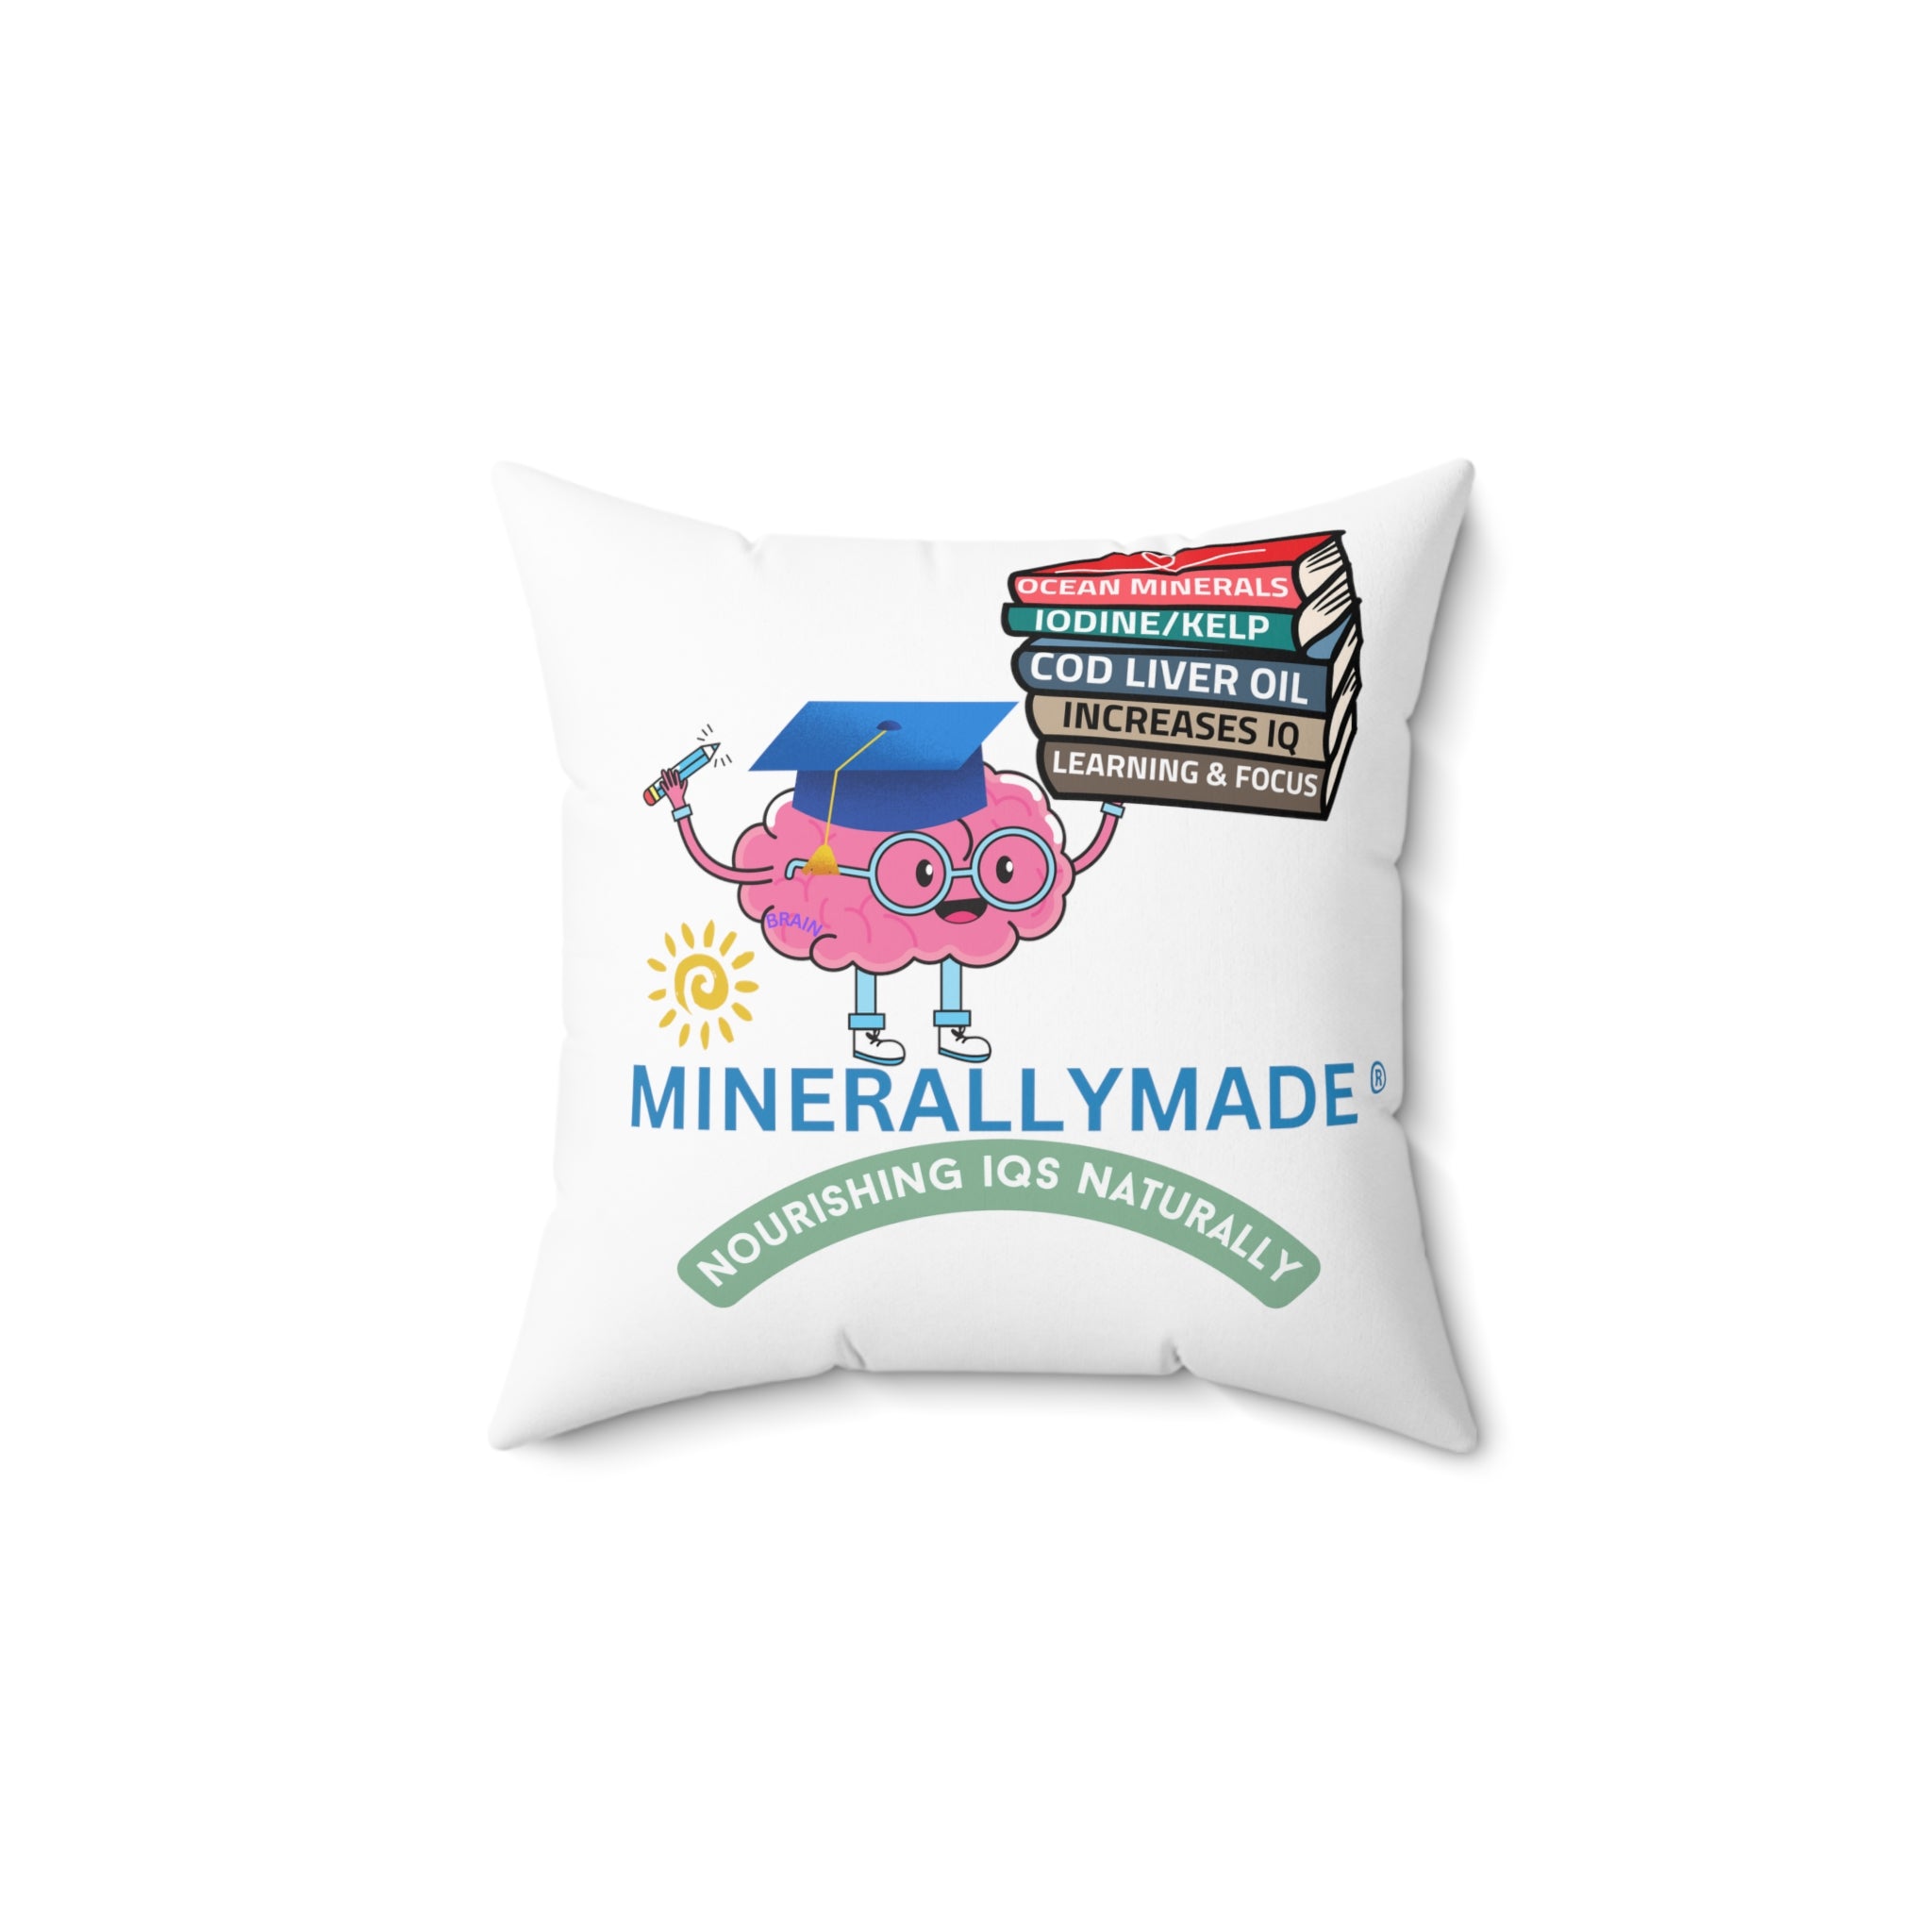 Minerallymade | Nourishing IQs Naturally | Spun Polyester Square Pillow | 4 SIZES